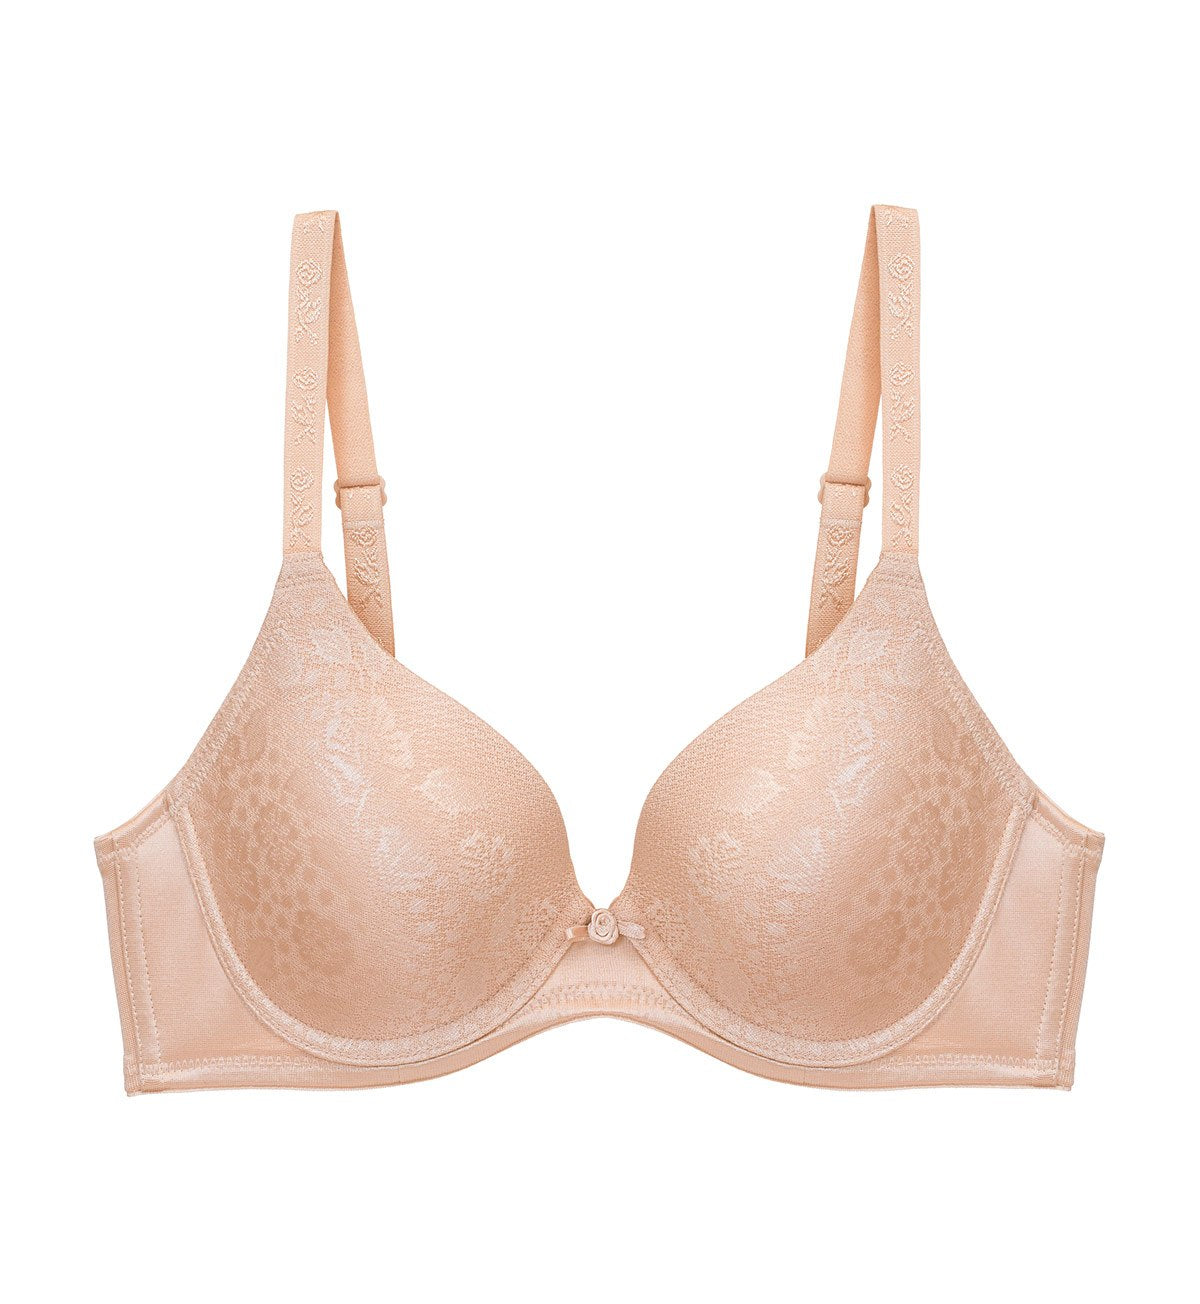 Maximizer Wired Push Up Bra in Skin - Light Combination